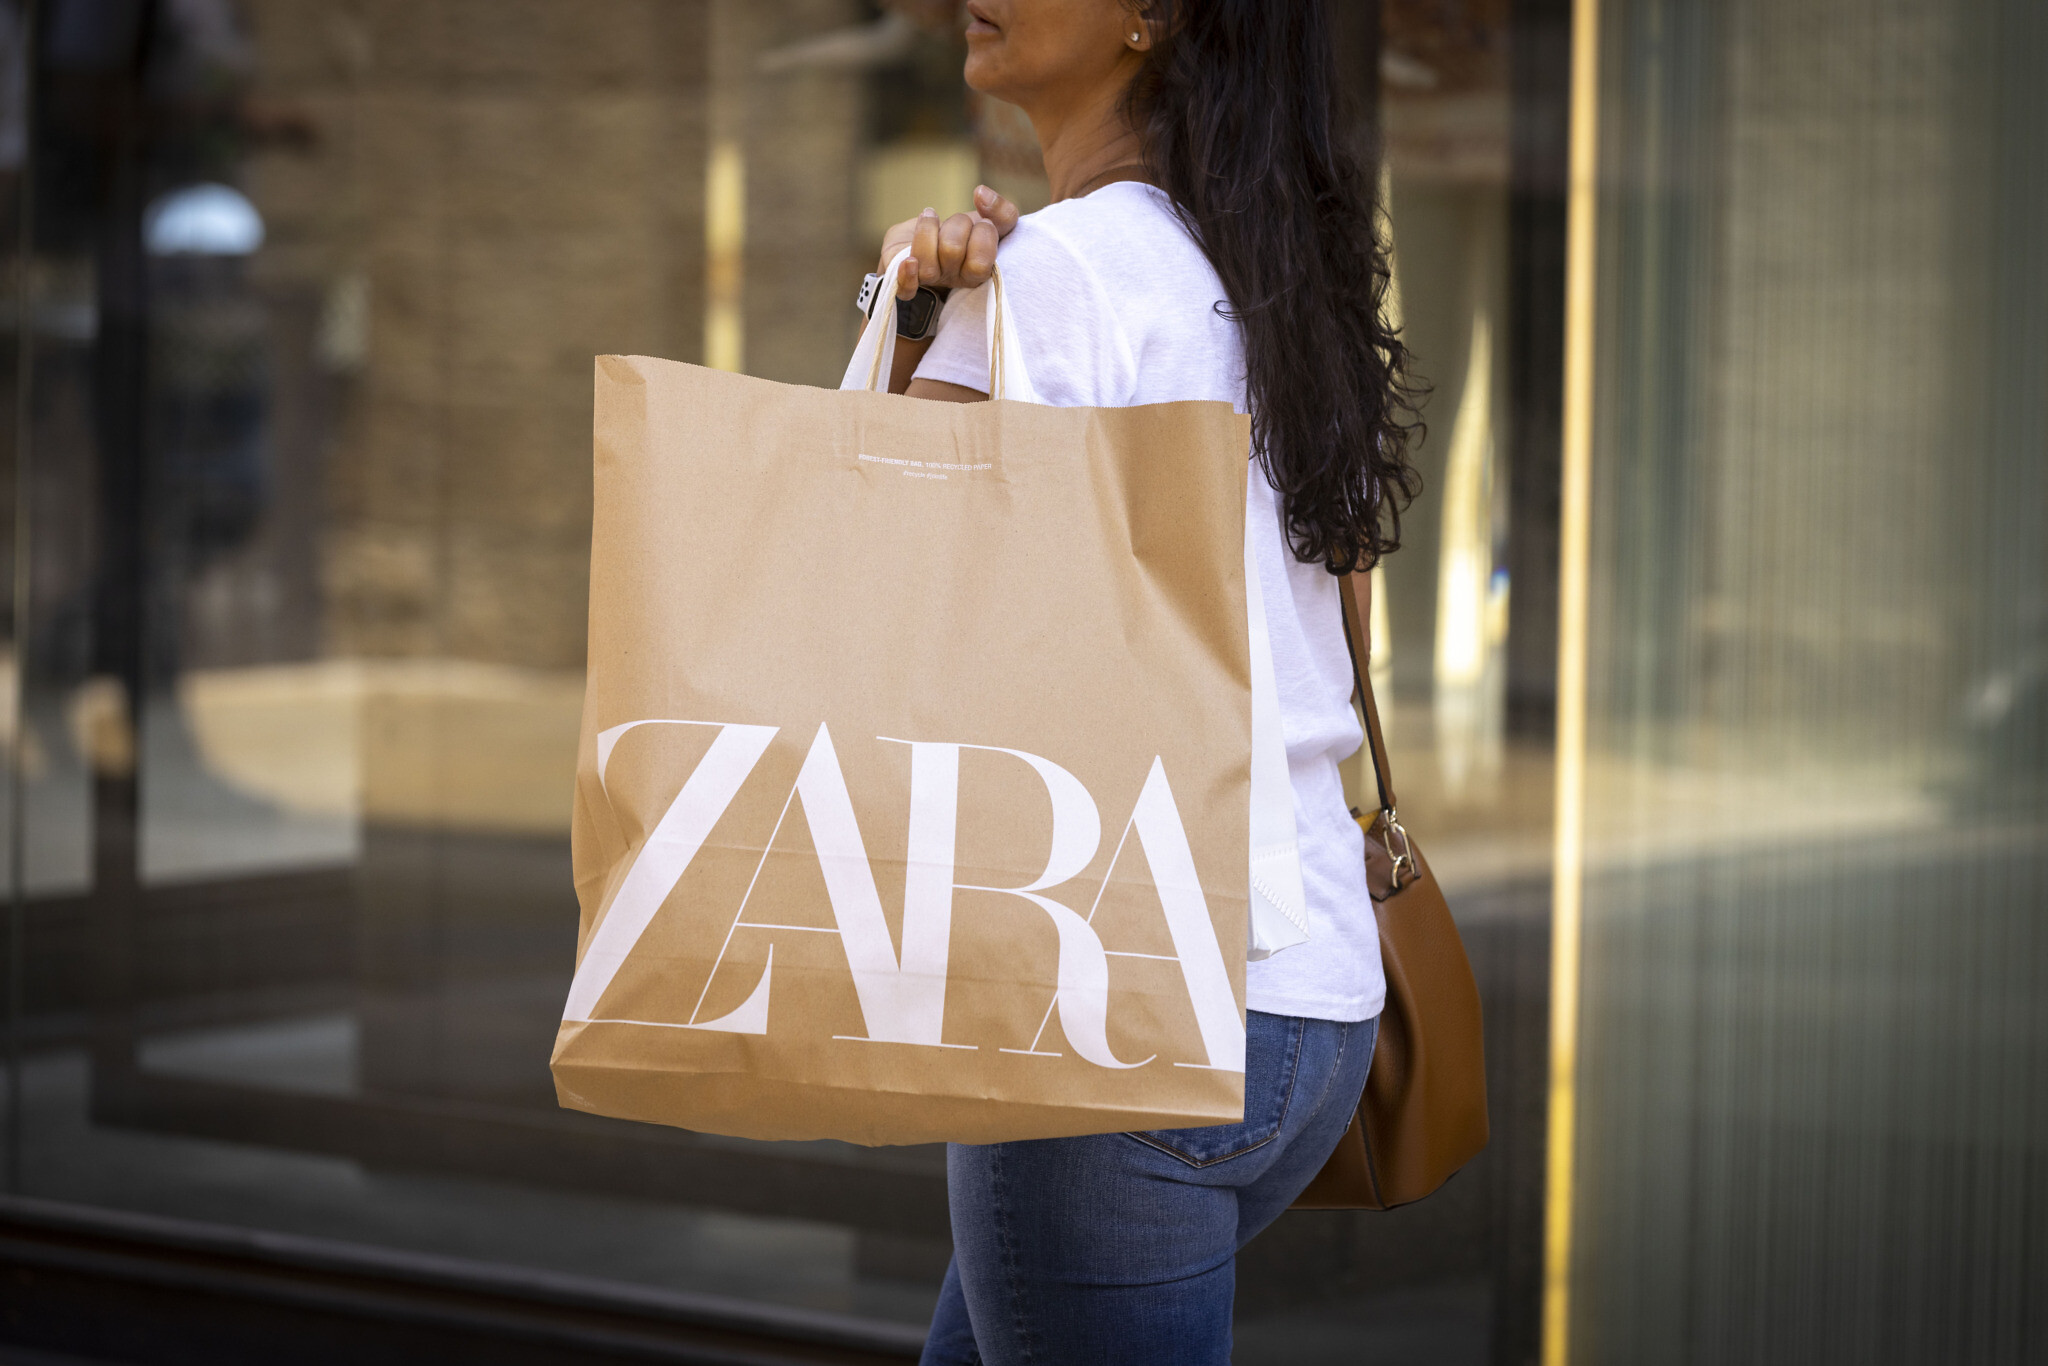 Zara drops clothing ad after claims it was reminiscent of Gaza body bags